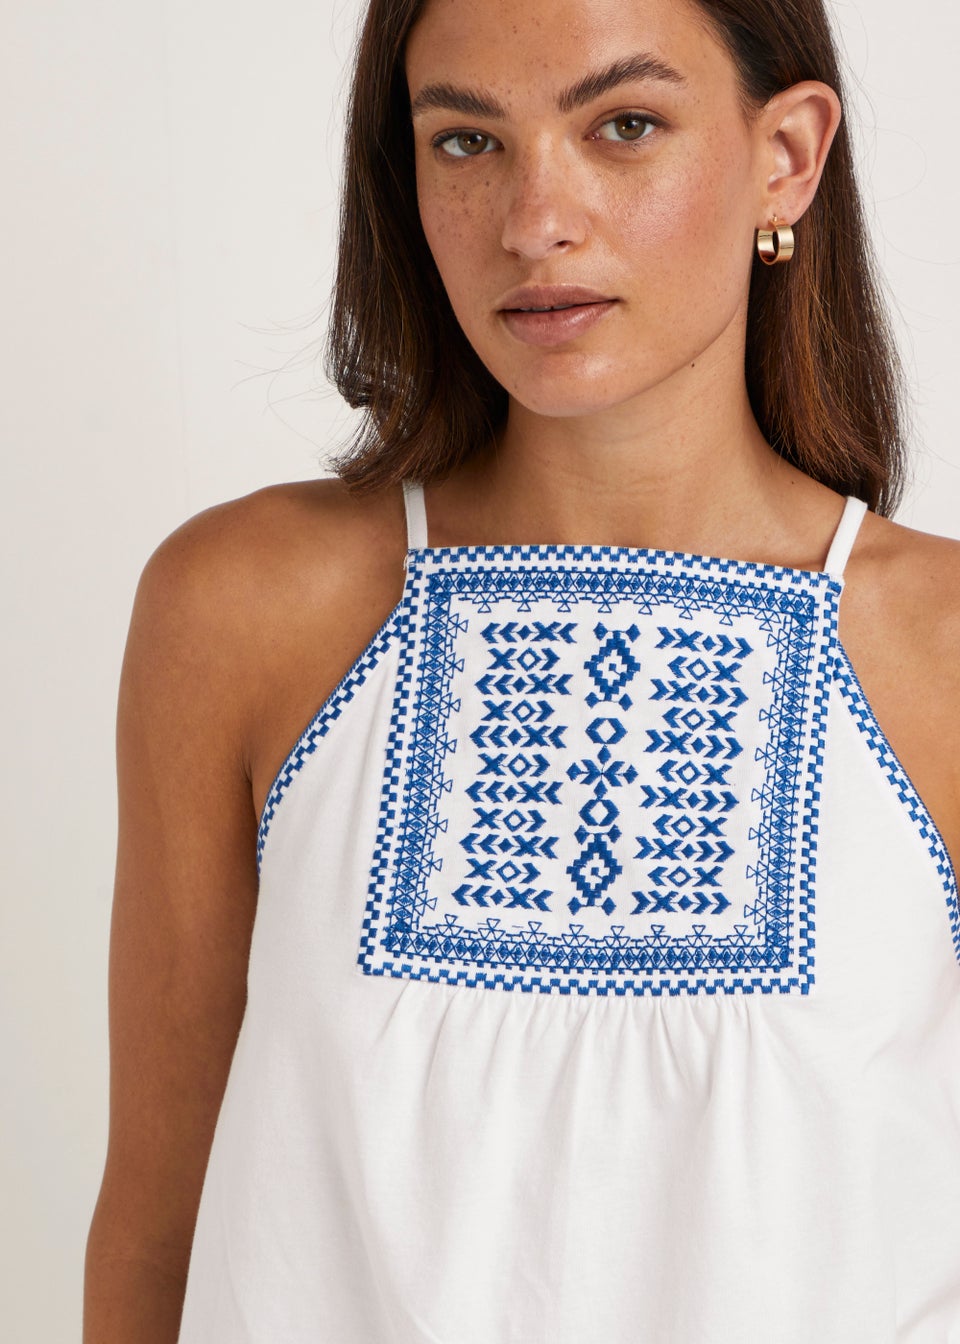 White Embroidered Cami Top - Matalan